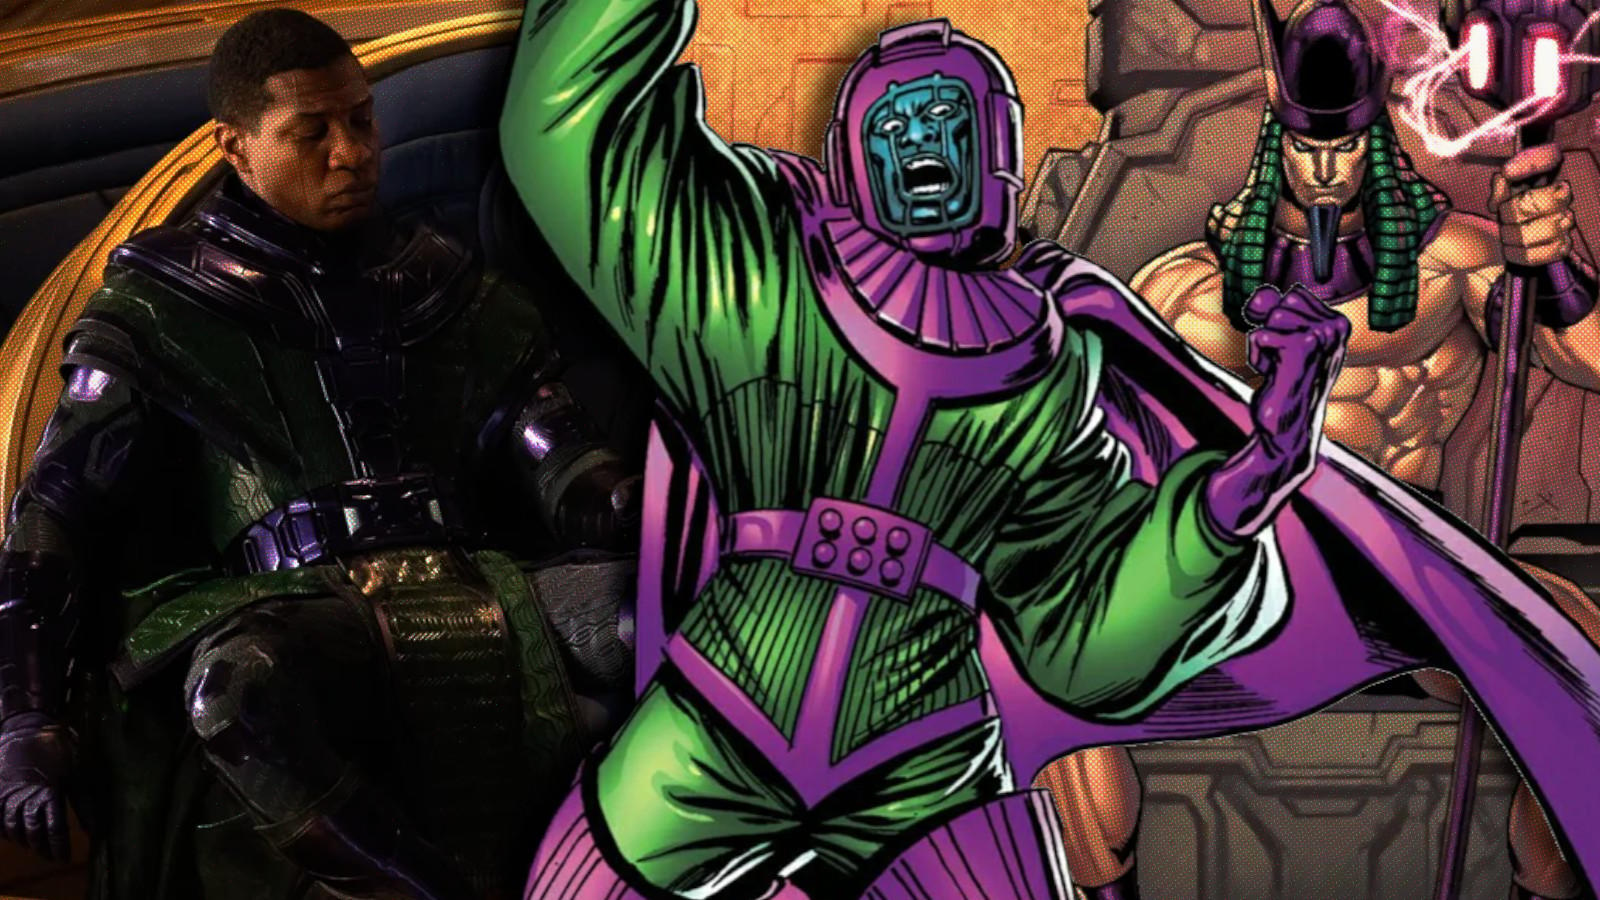 Kang's debut in the MCU and Marvel Comics